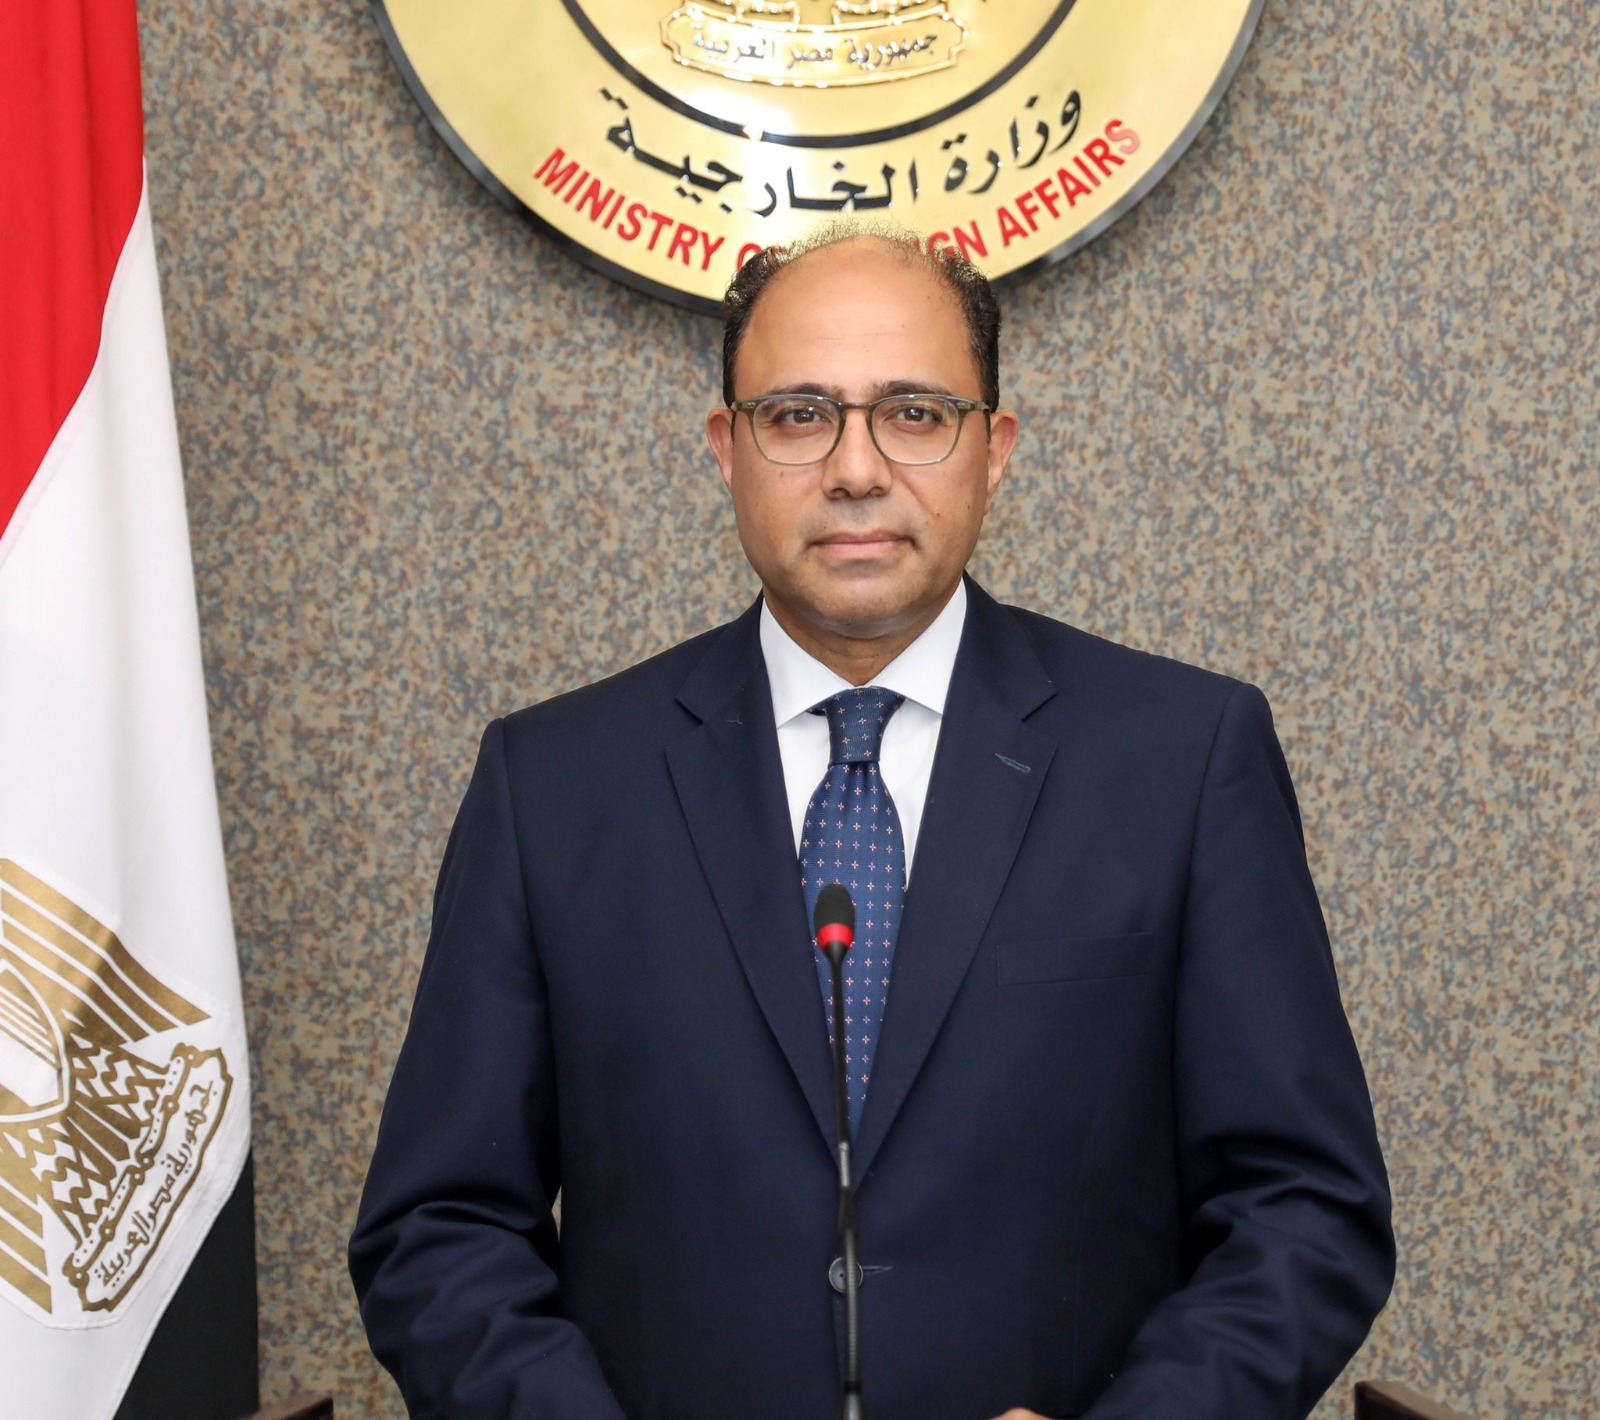 Egypt offers its condolences to Jordan for the victims of the accident involving military trucks as part of a relief aid convoy heading to Gaza.